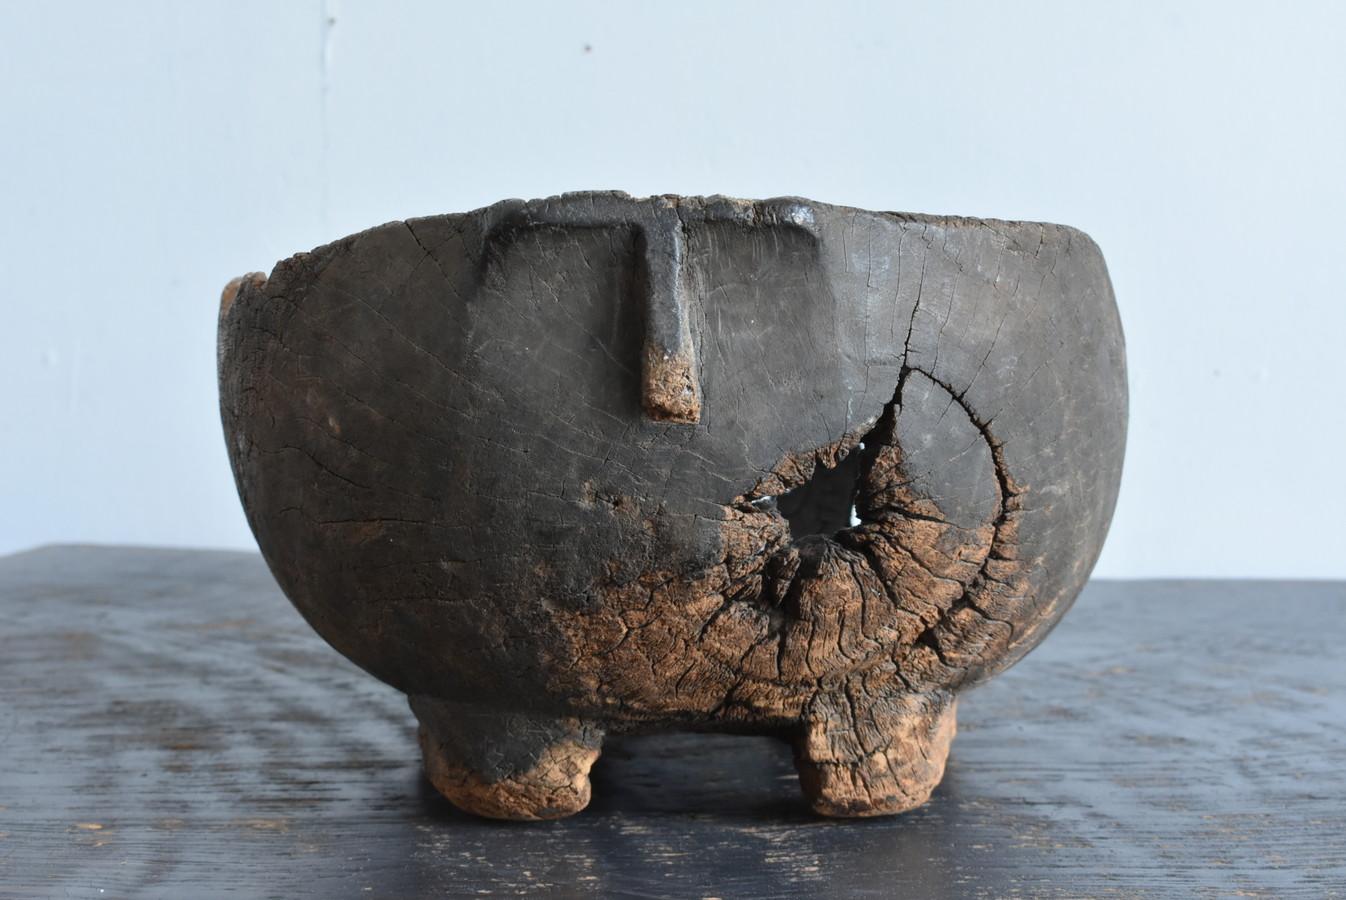 Southeast Asian Rustic Old Wooden Bowl from Southeast Asia / a Hollow Container